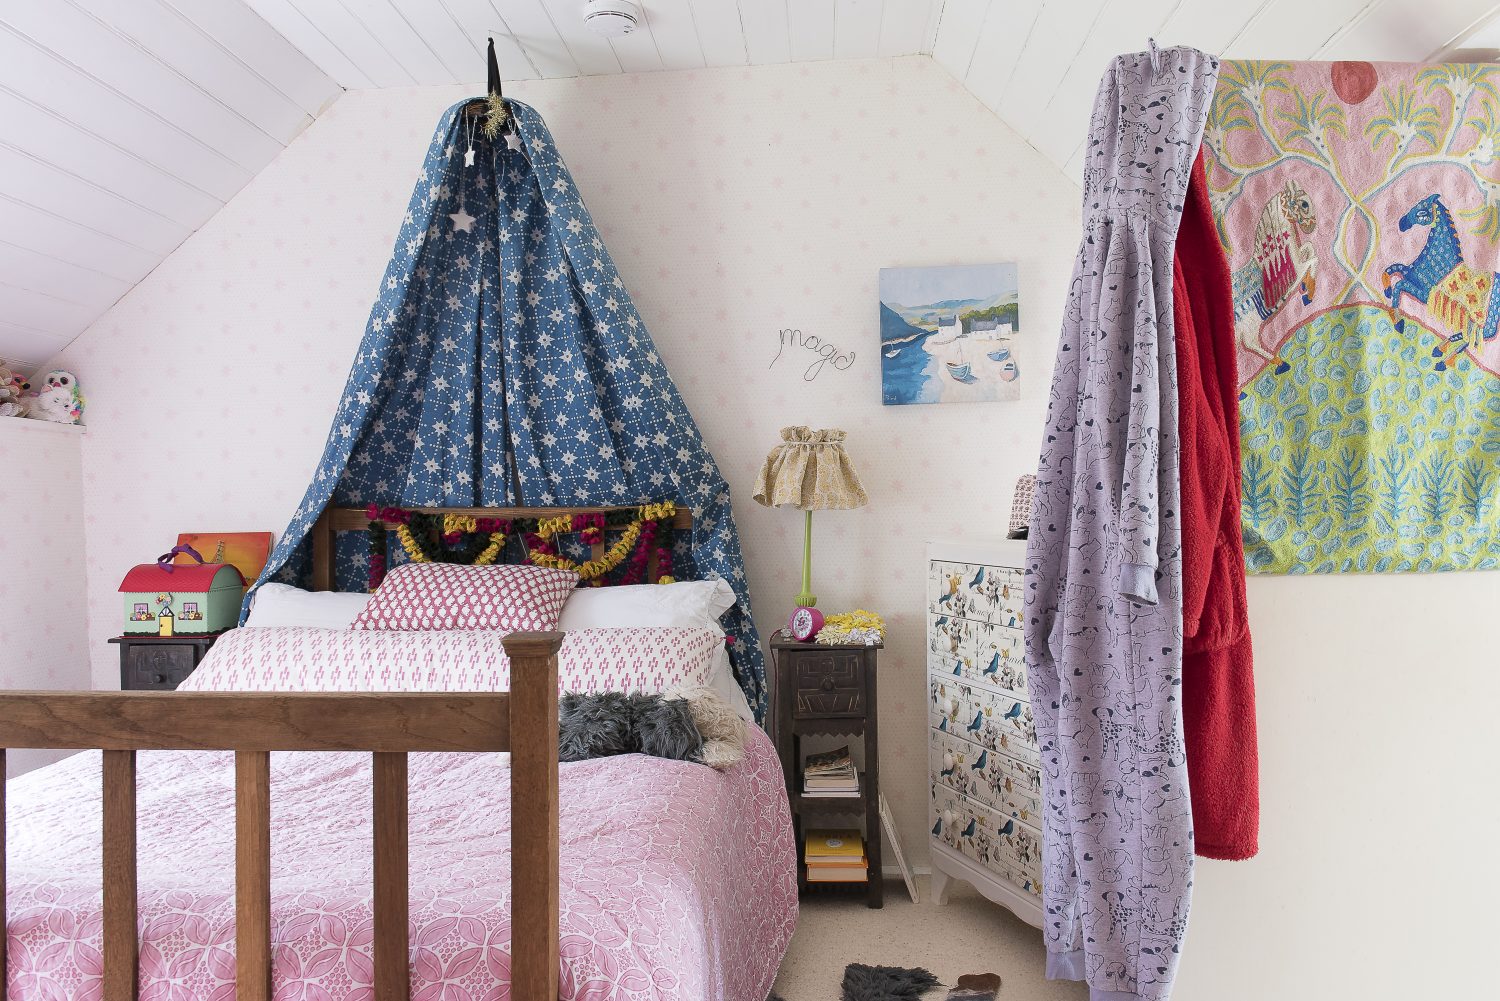 Daughter Lani’s bedroom. The fabric in the canopy is one of Molly’s hand-block printed cottons, Stars